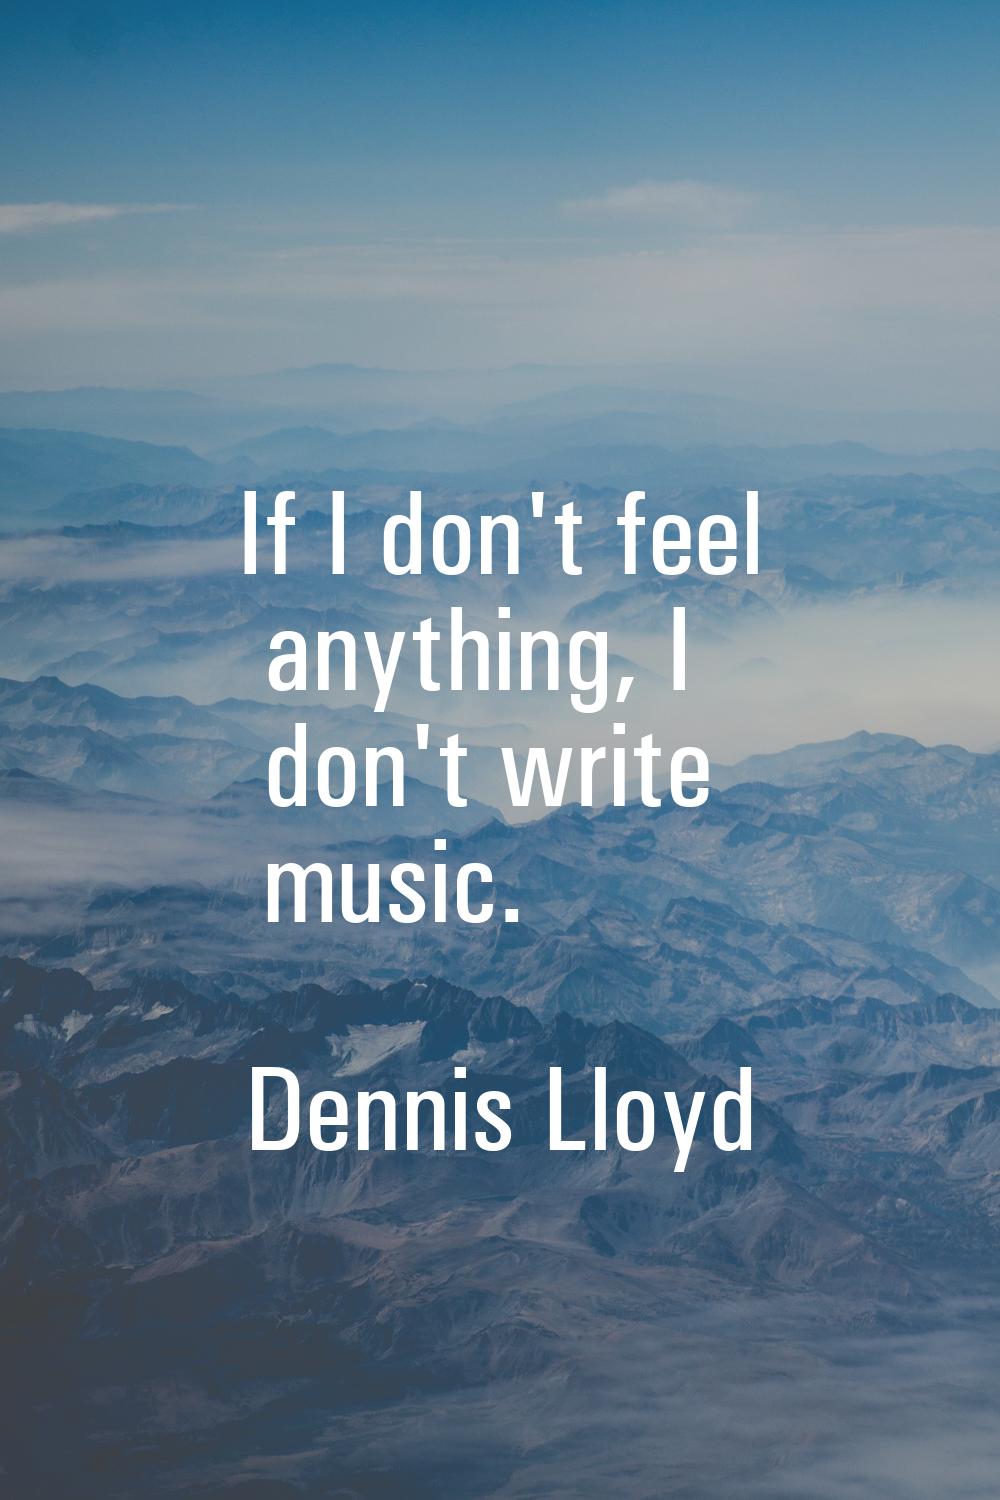 If I don't feel anything, I don't write music.